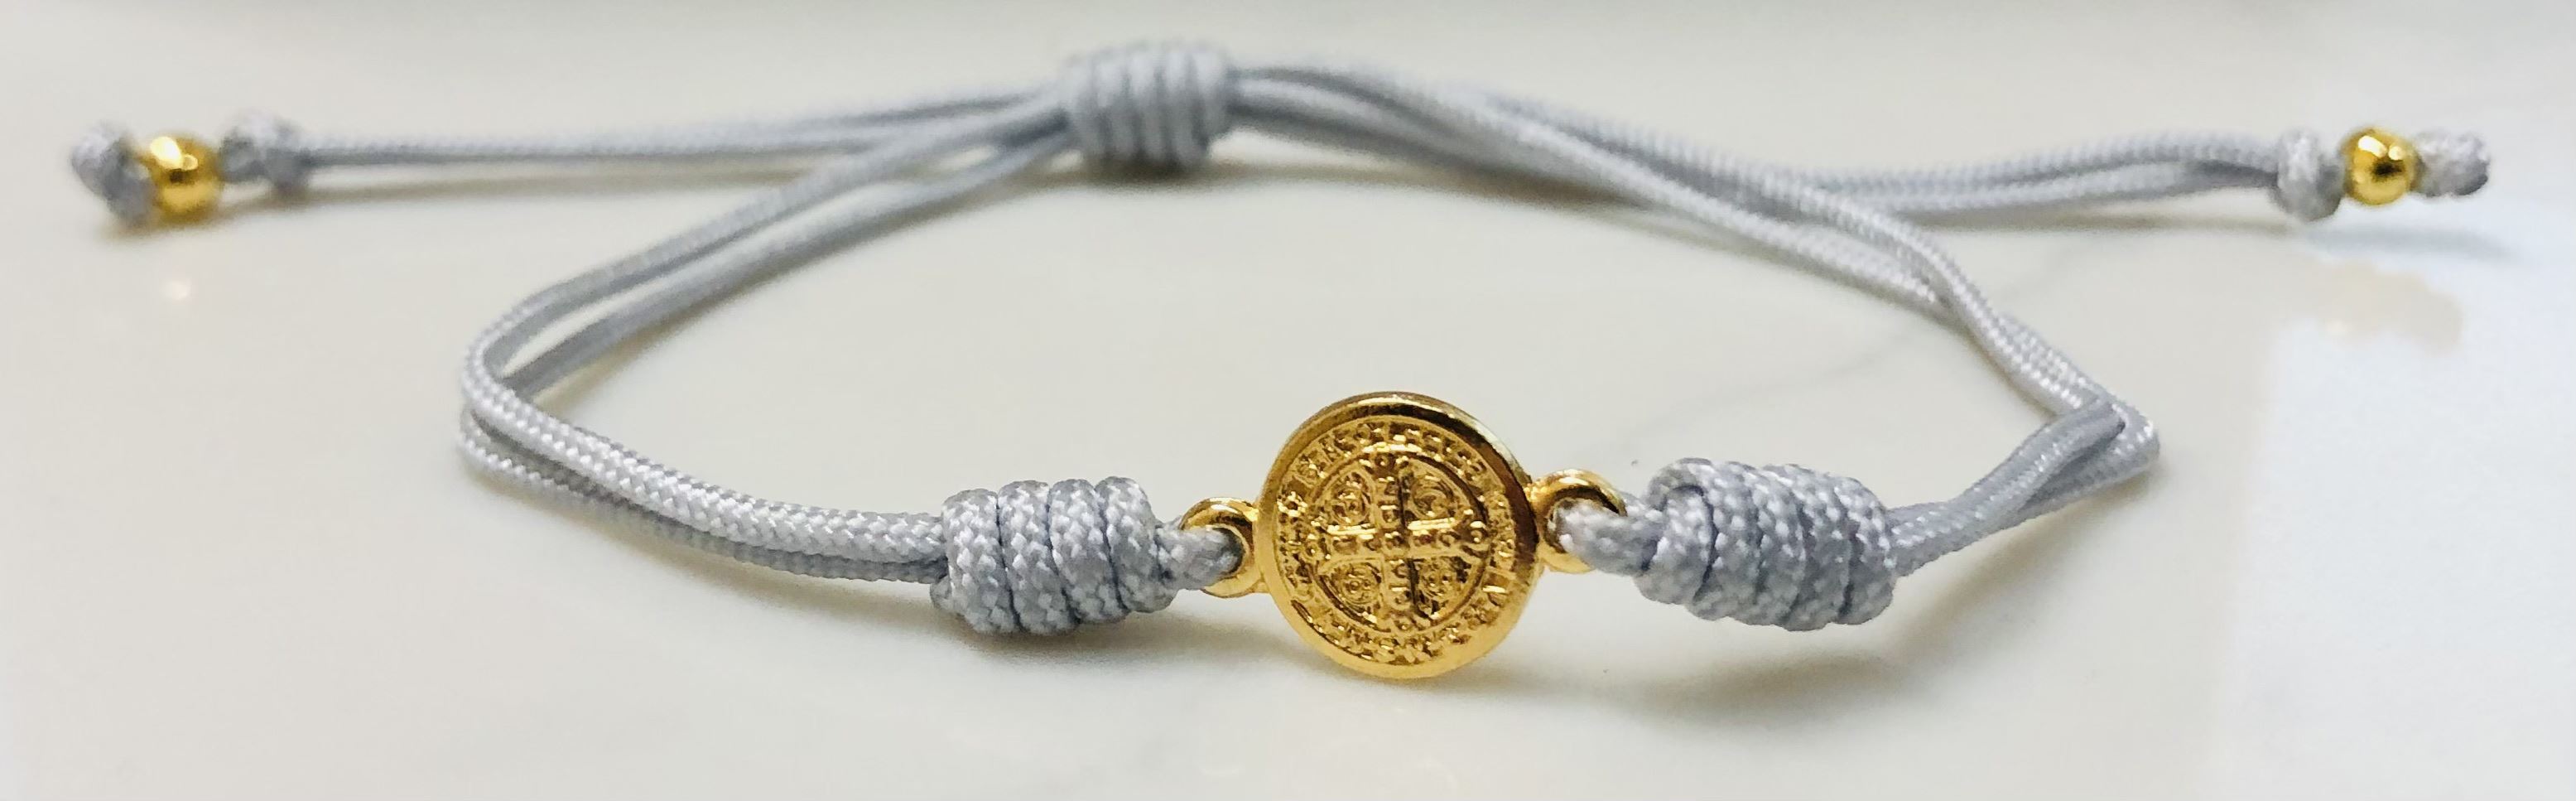 Simple Blessing Bracelet with One Medal Grey Thread